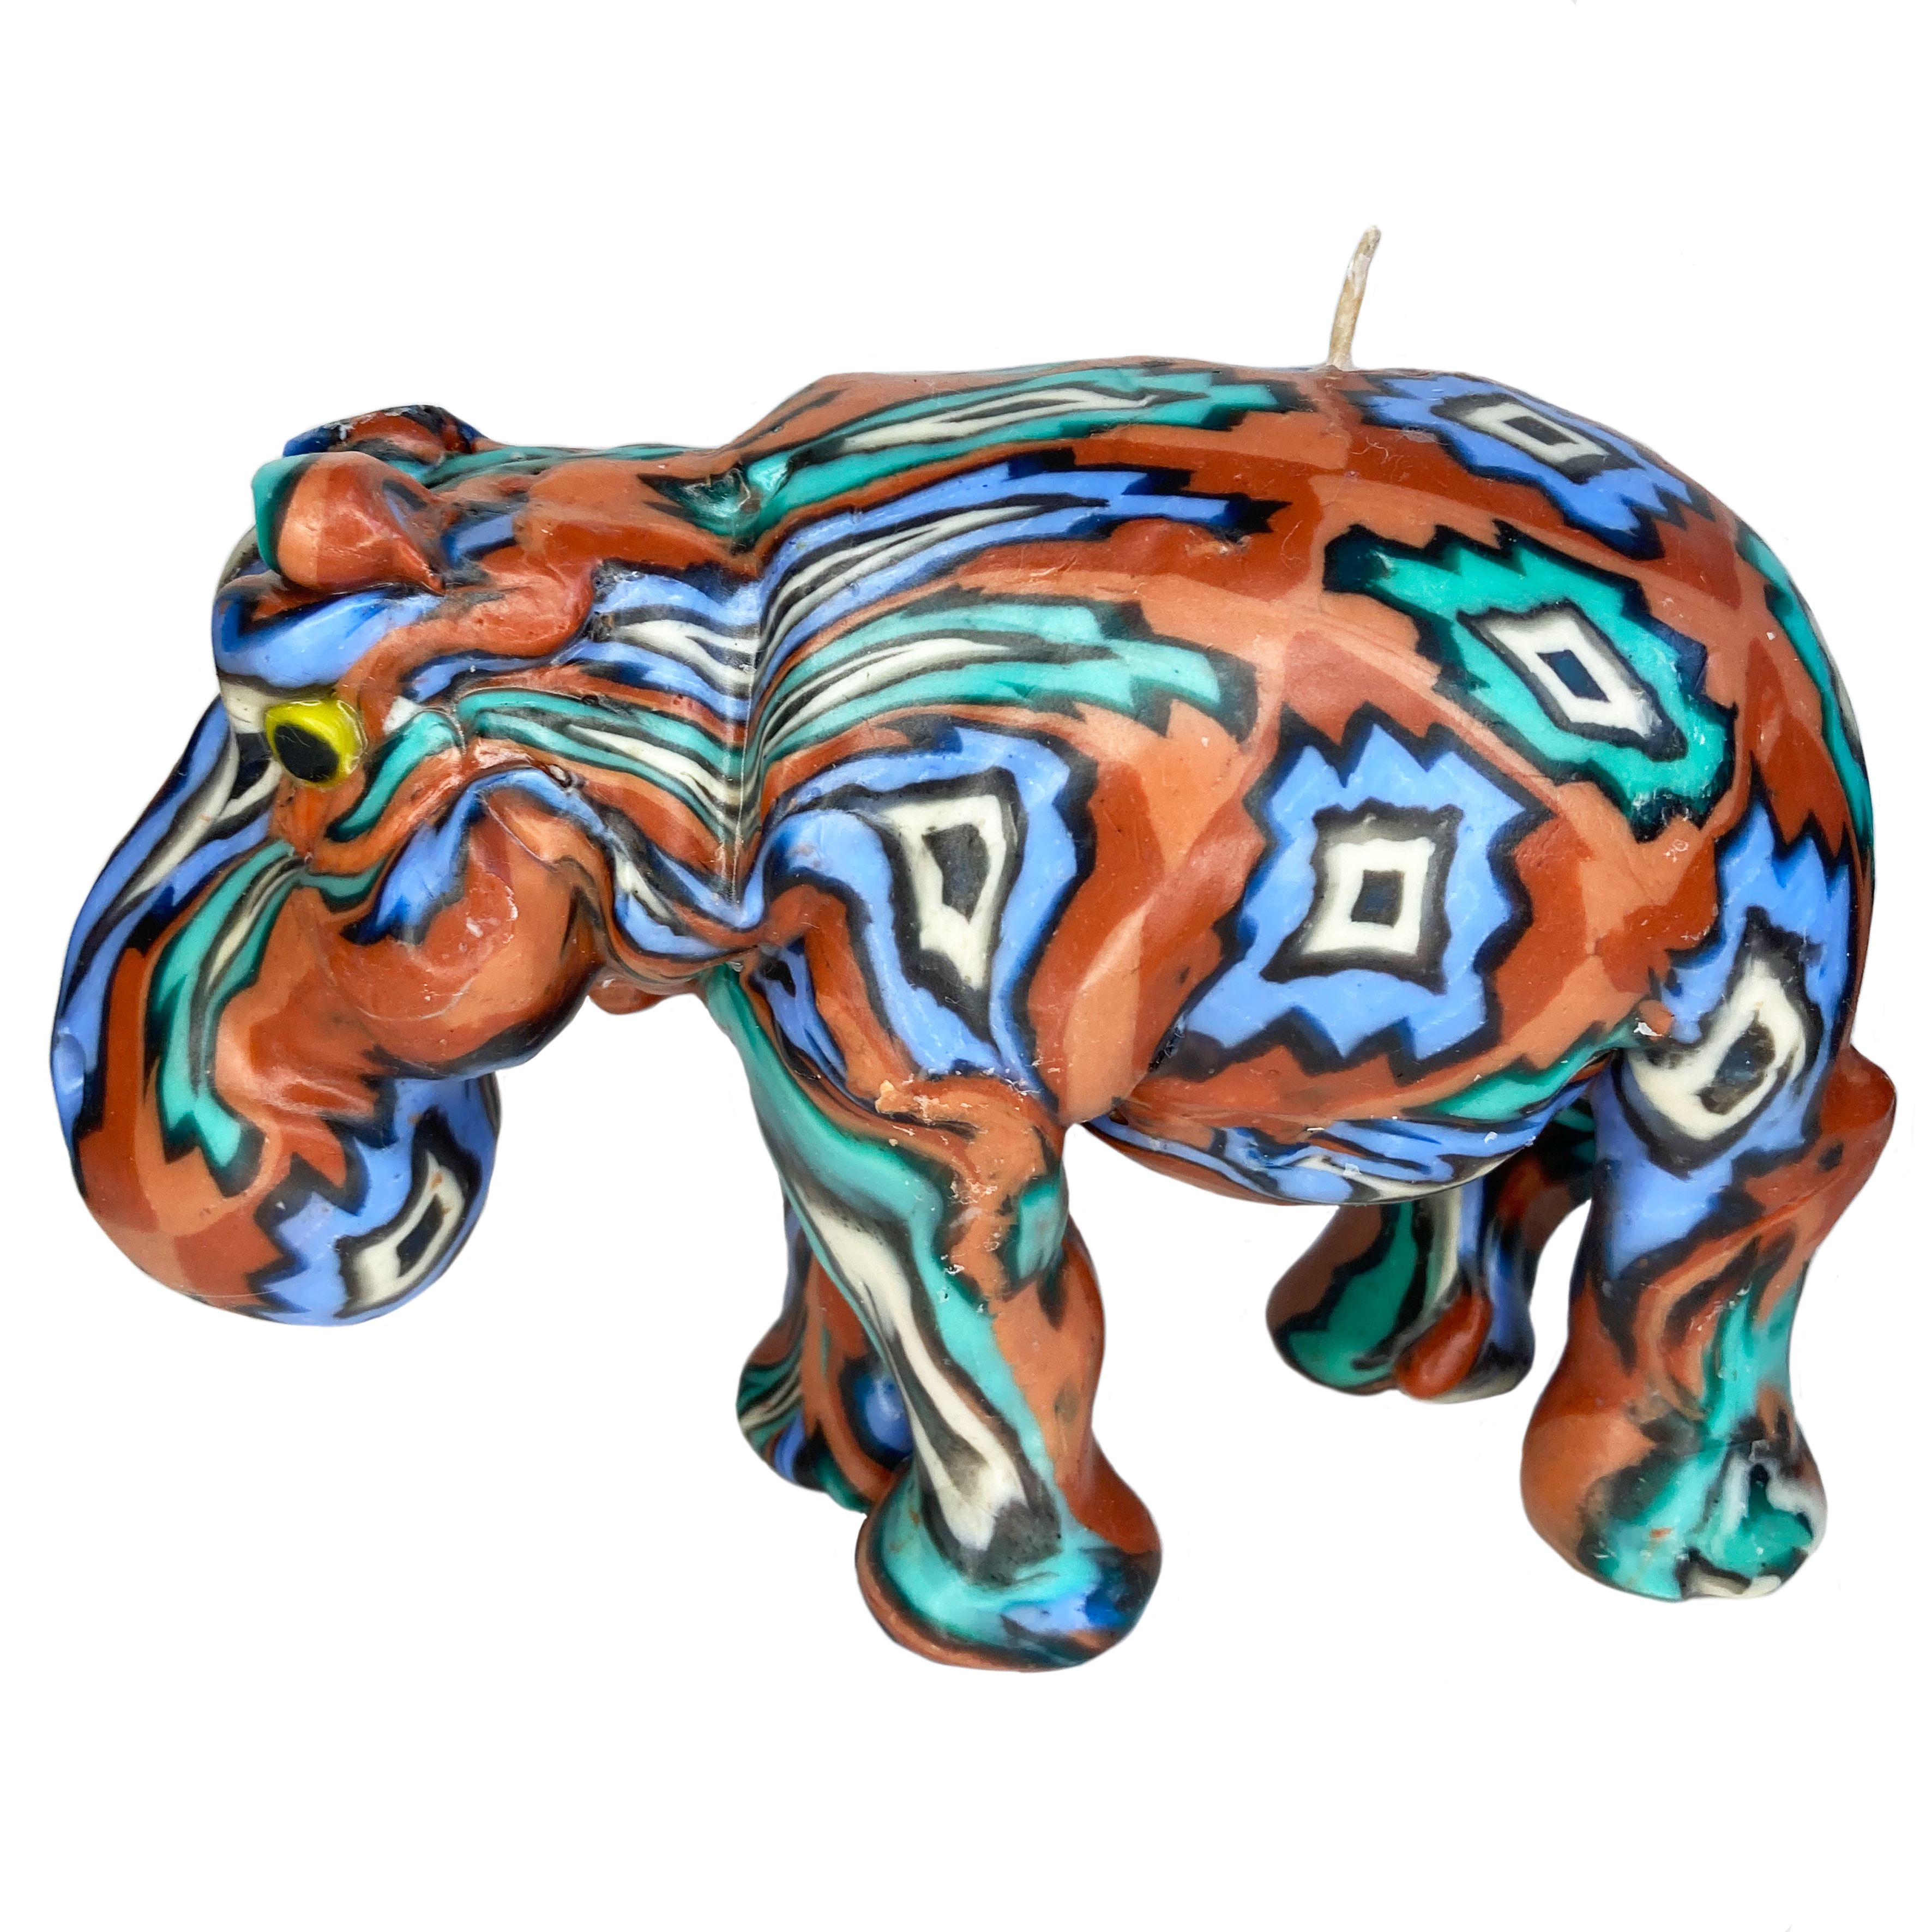 Swazi Candles Large Fairtrade Hippo Swazi Candle In Diamond Pattern